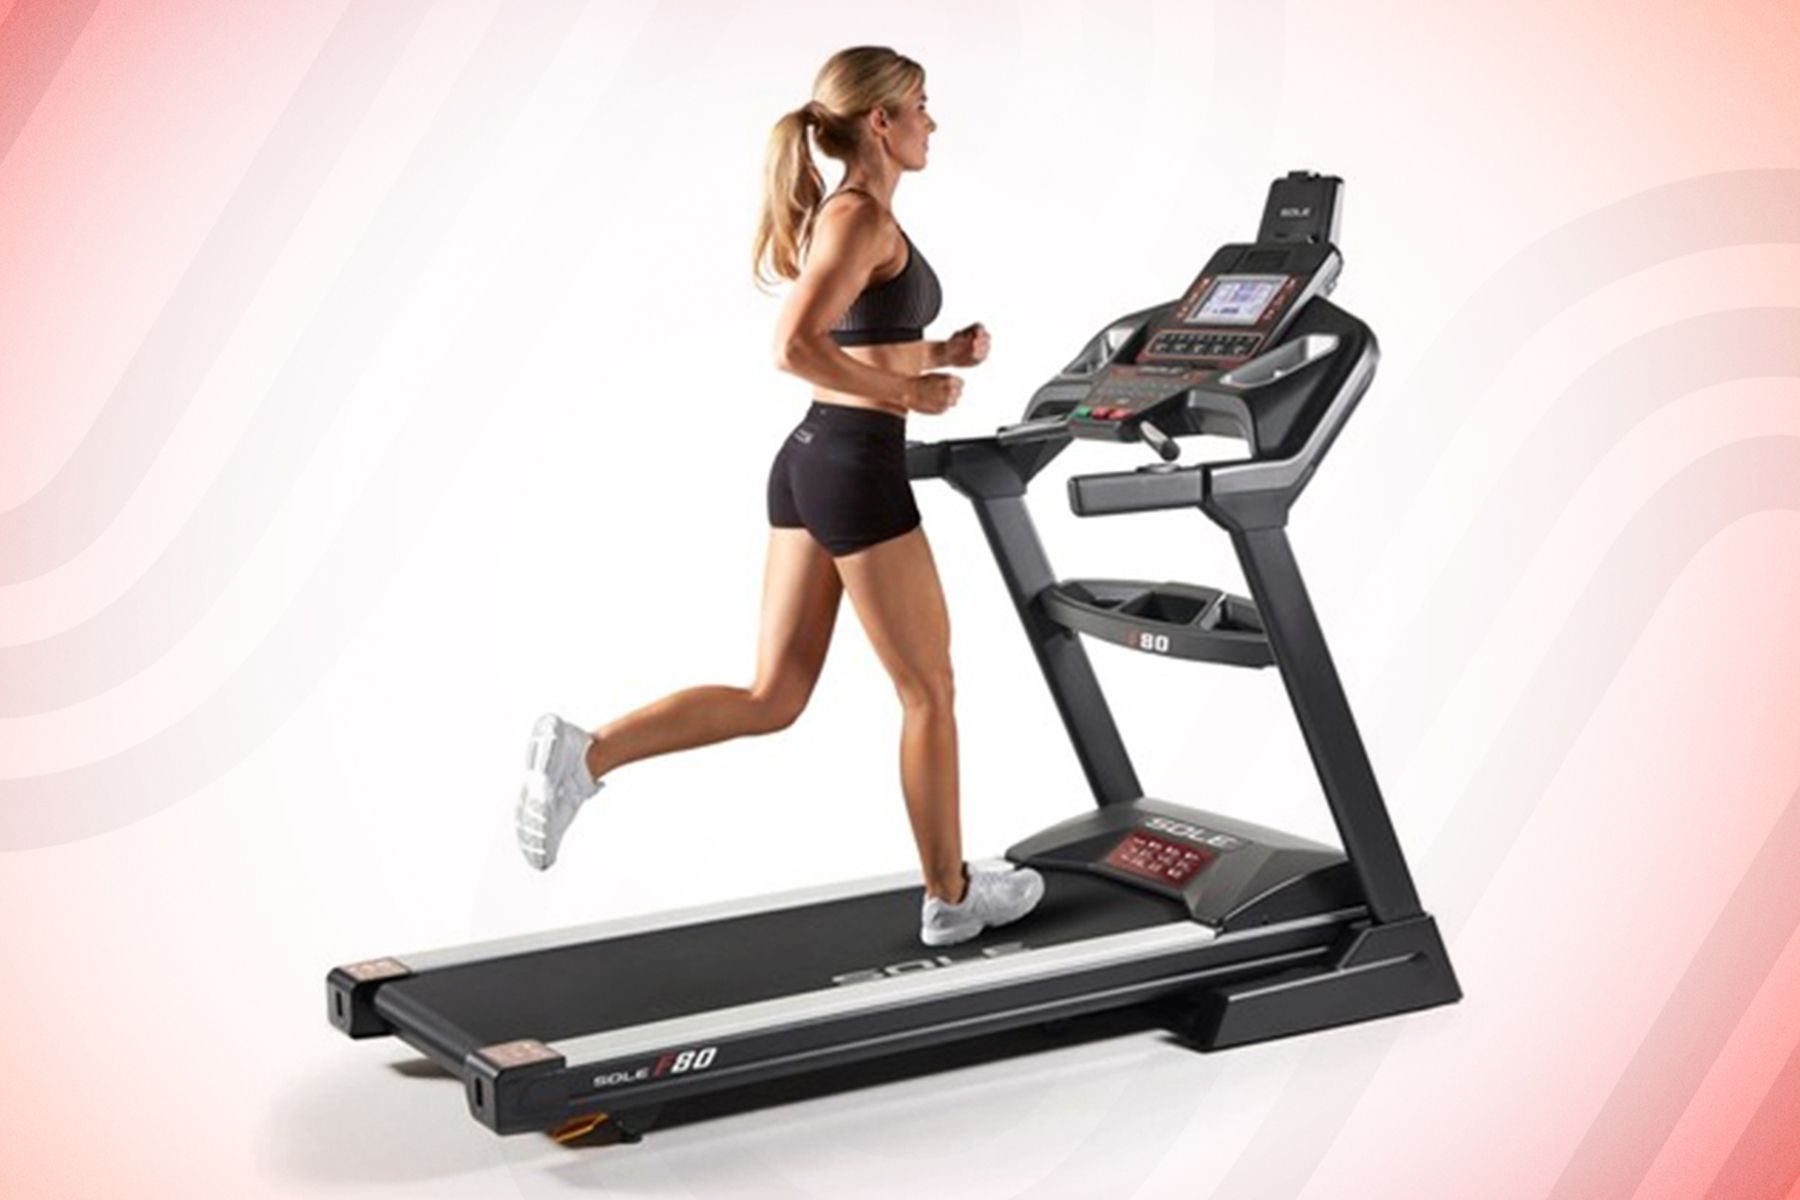 The SOLE Fitness F80 Treadmill Is One of Our Favorites, and It's 43% Off Right Now